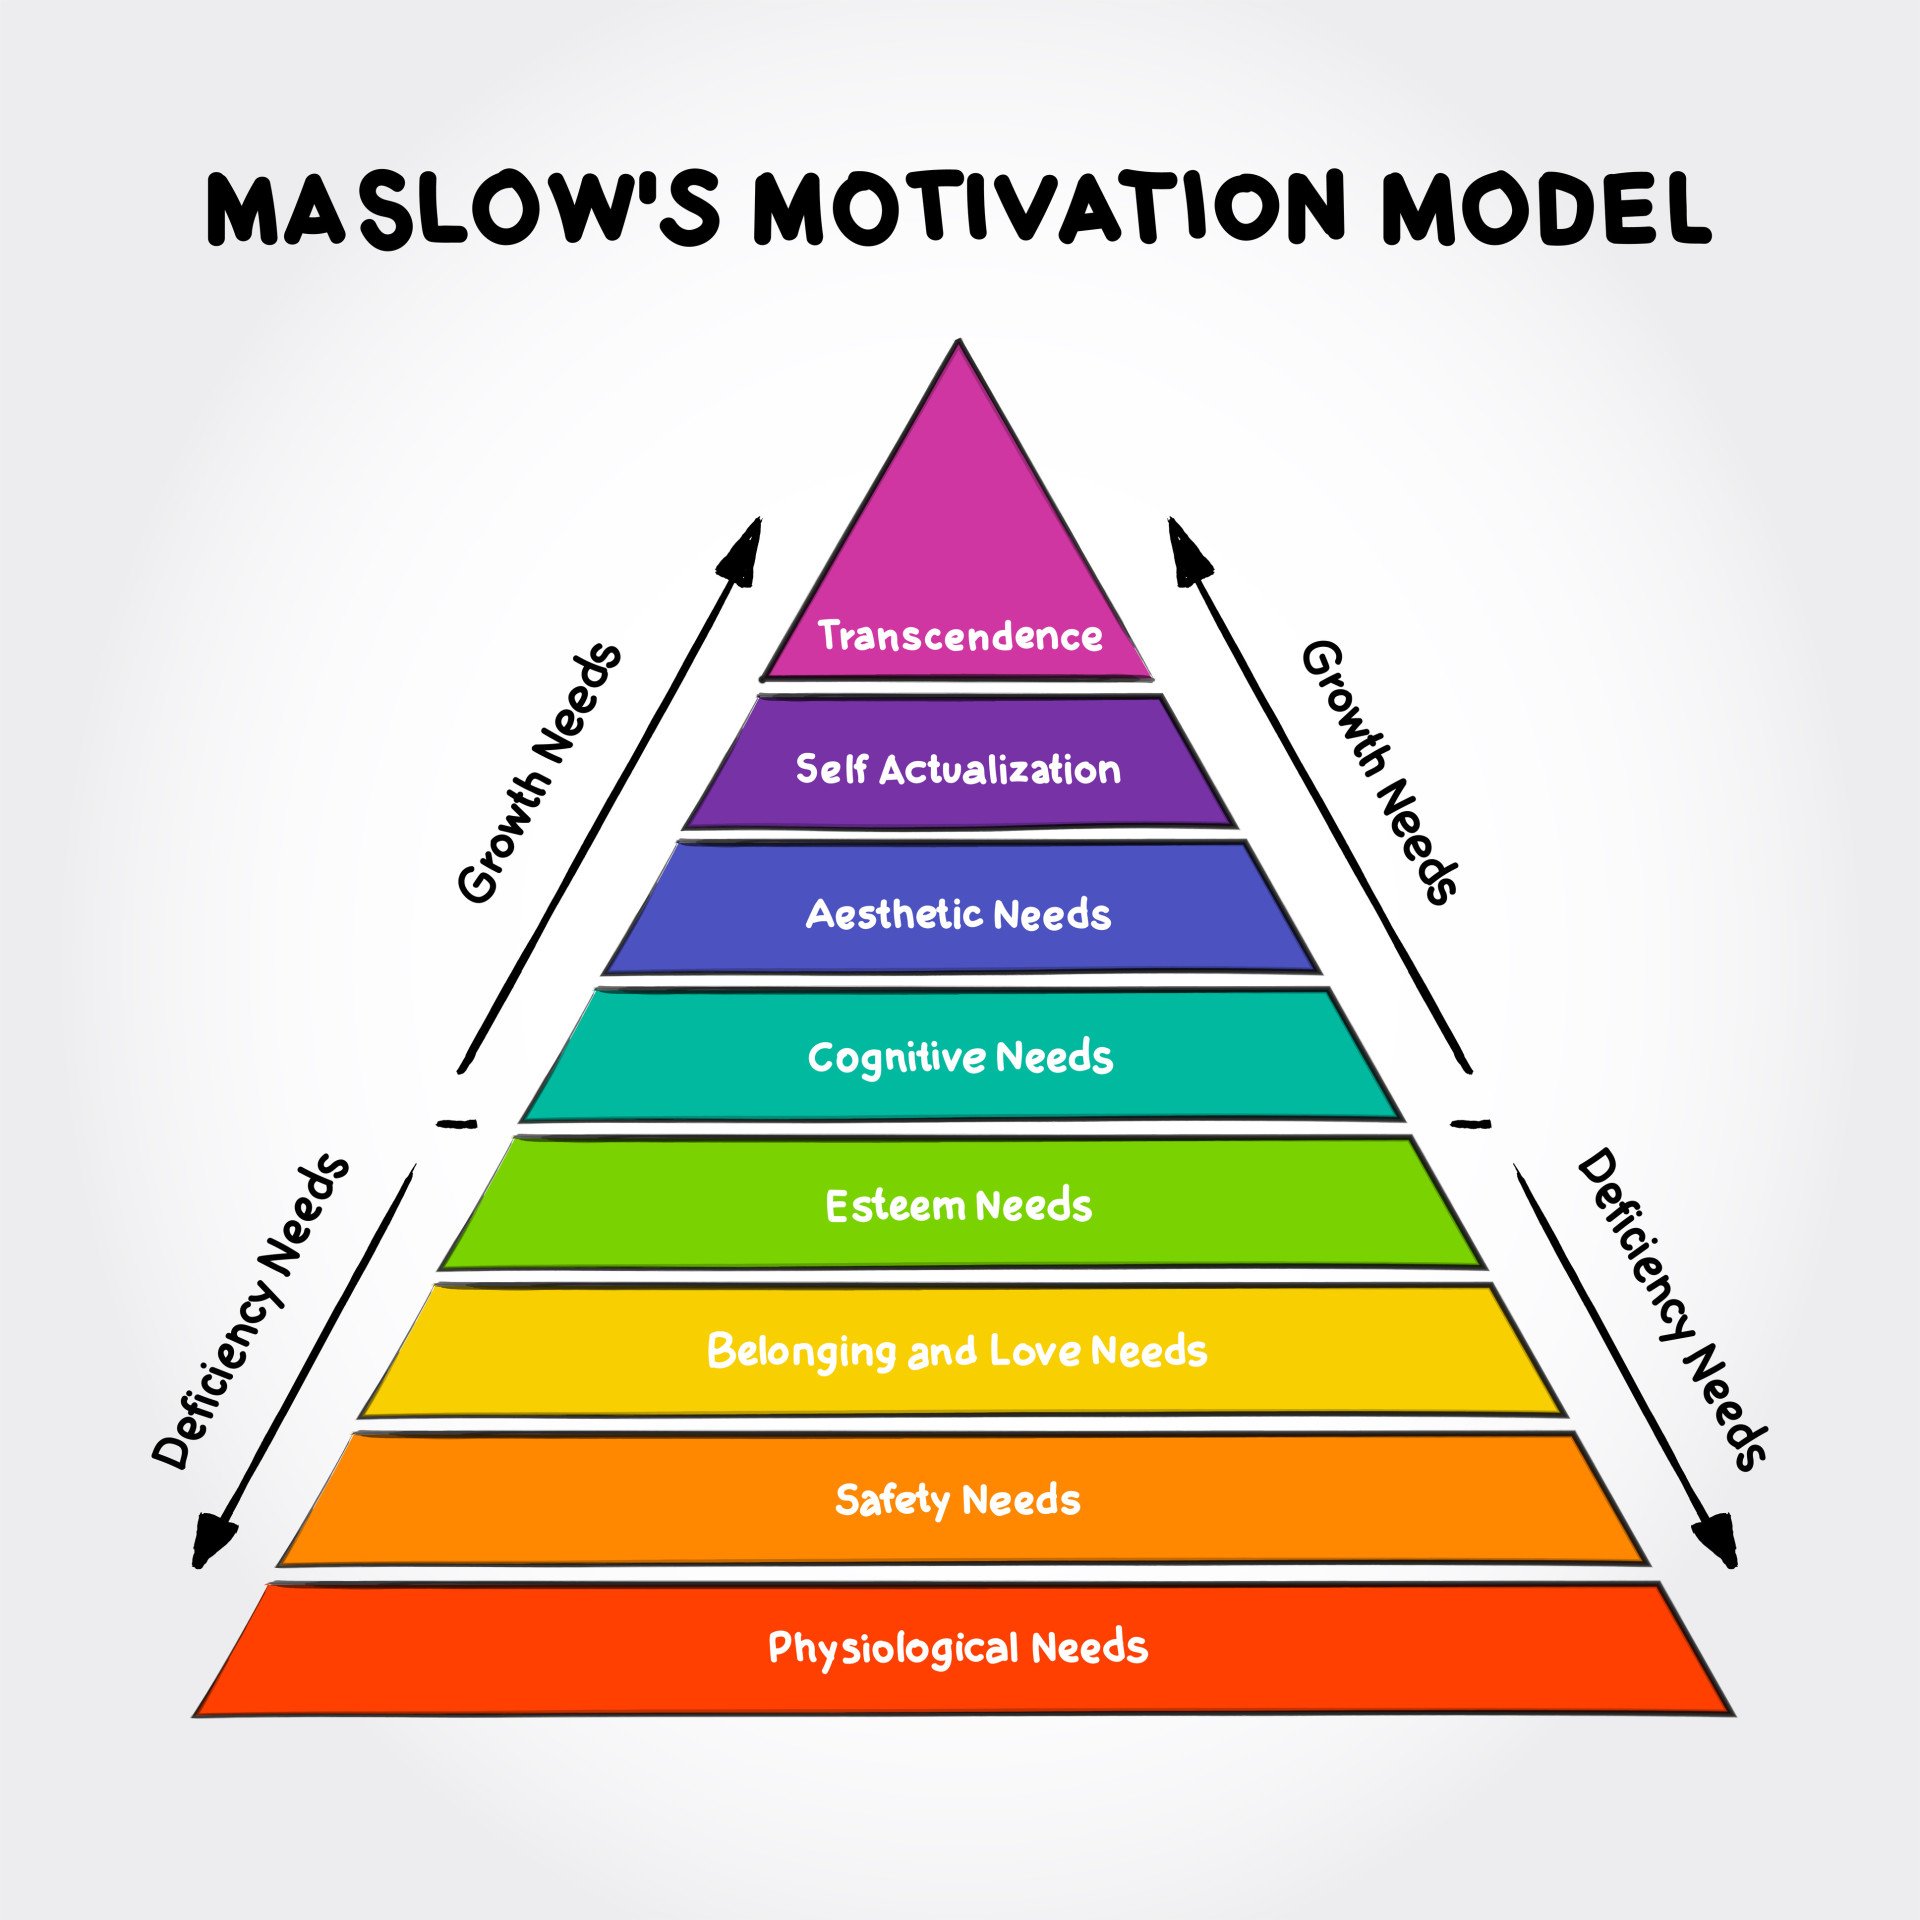 Maslow’s Motivation Model. Deficiency needs: physiological needs, safety needs, belonging and love needs, and esteem needs. Growth needs: cognitive needs, aesthetic needs, self actualization, and transcendence.